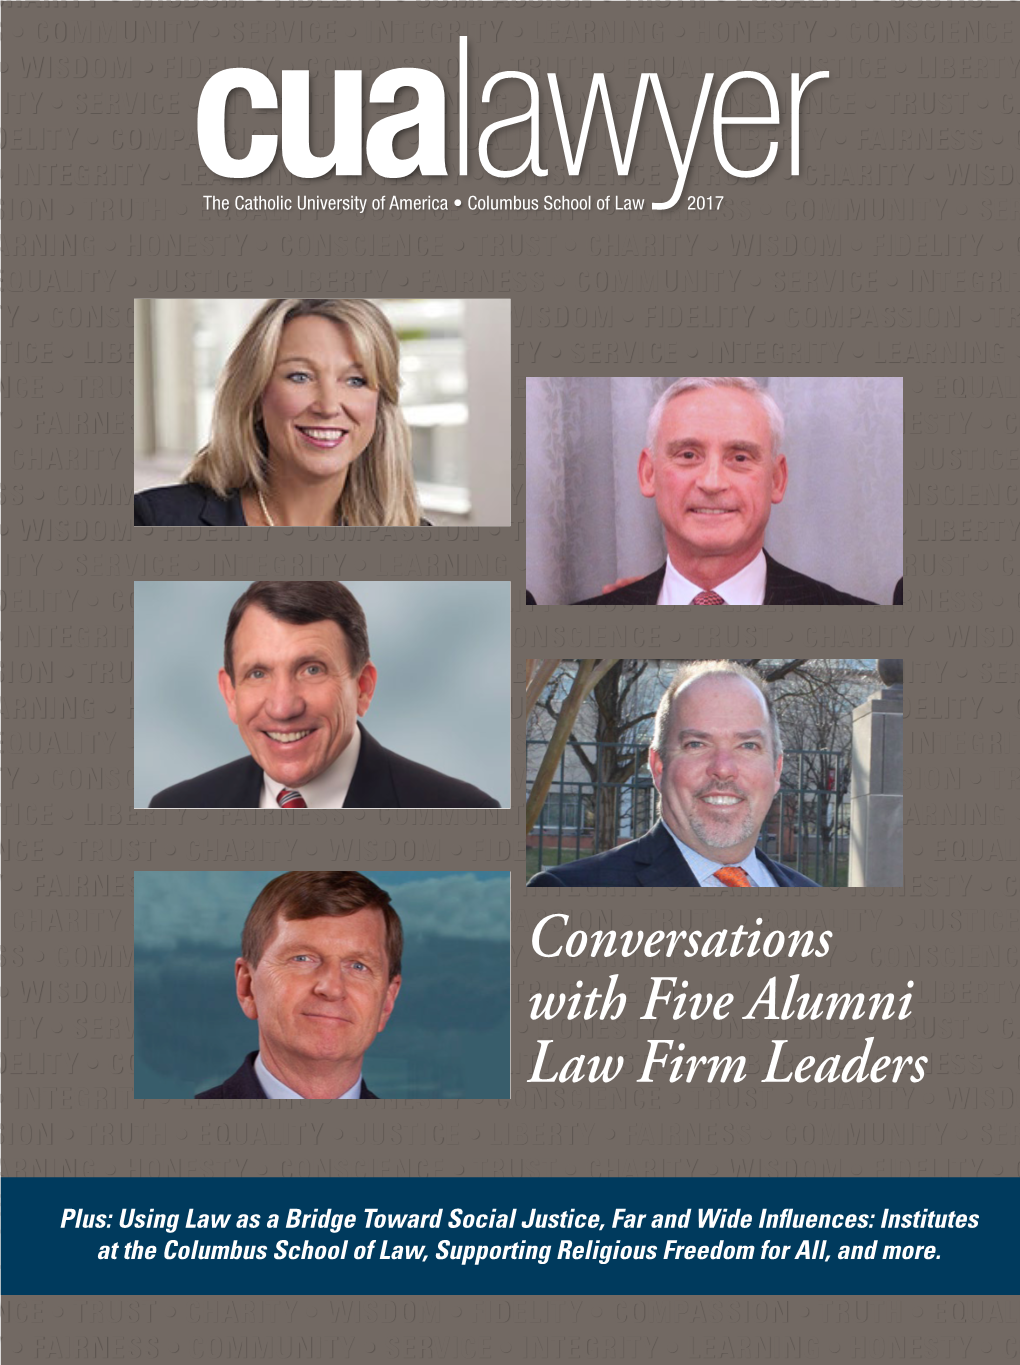 Conversations with Five Alumni Law Firm Leaders